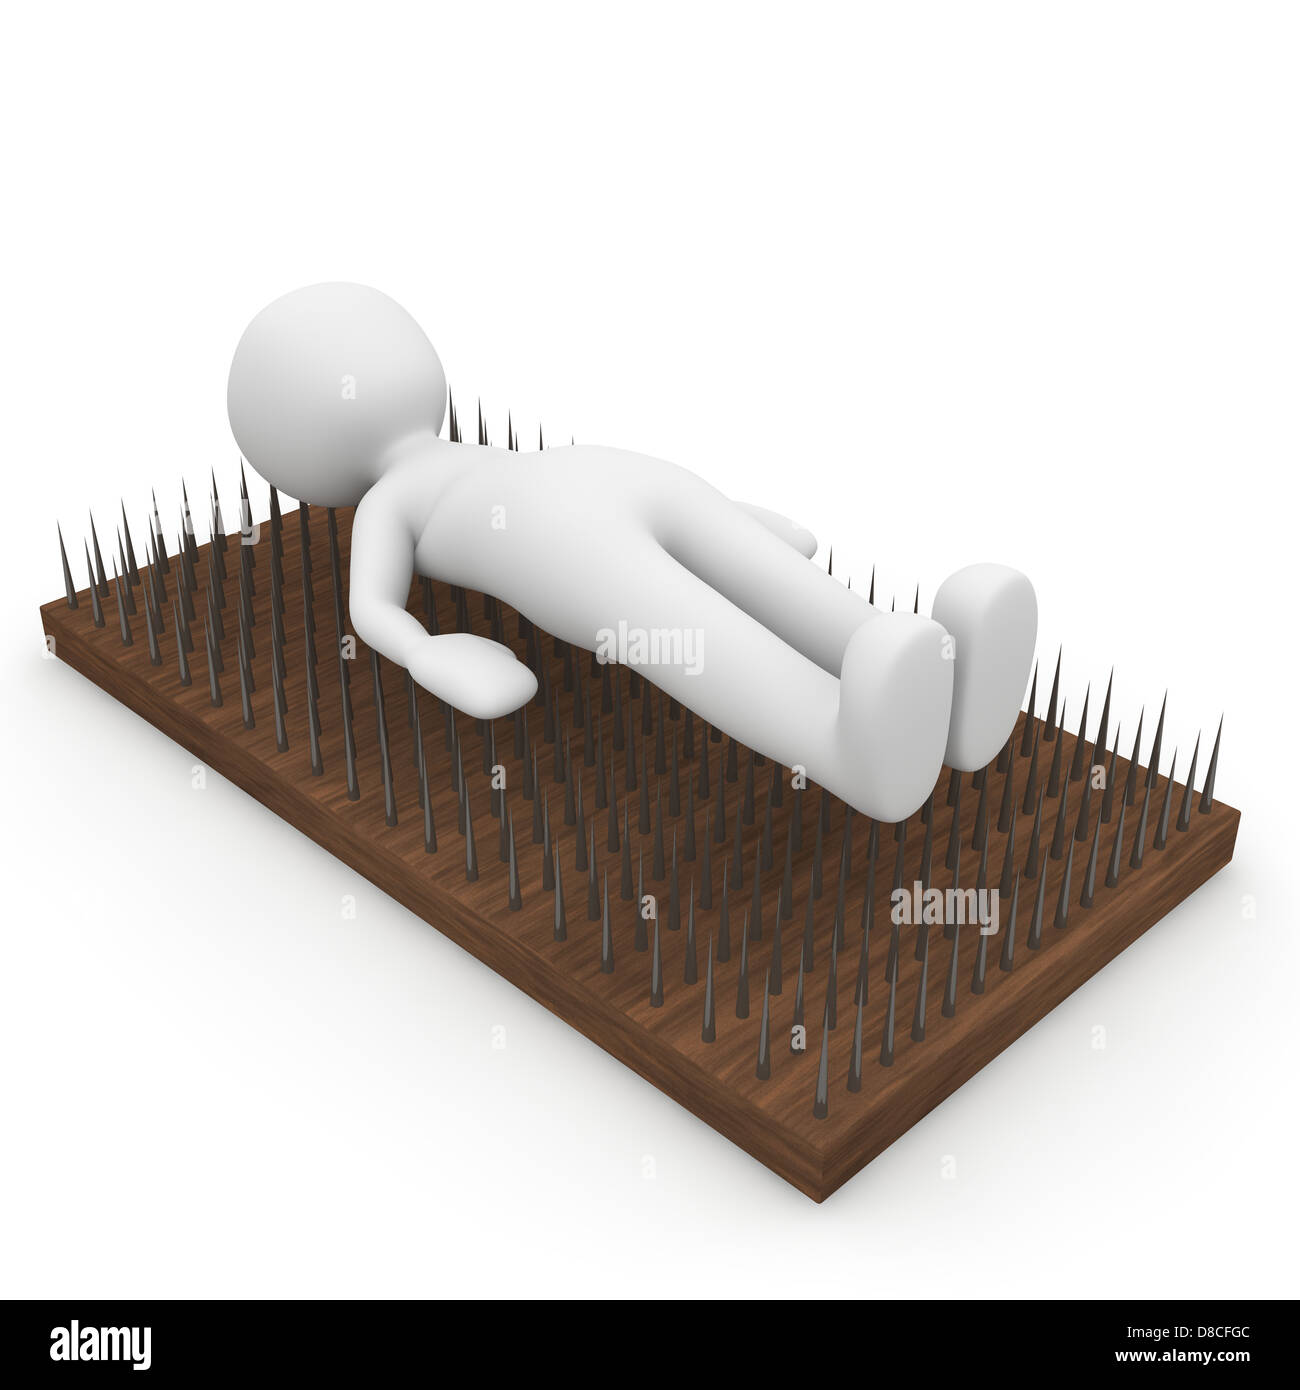 10. Bed of Nails | UCLA Physics & Astronomy